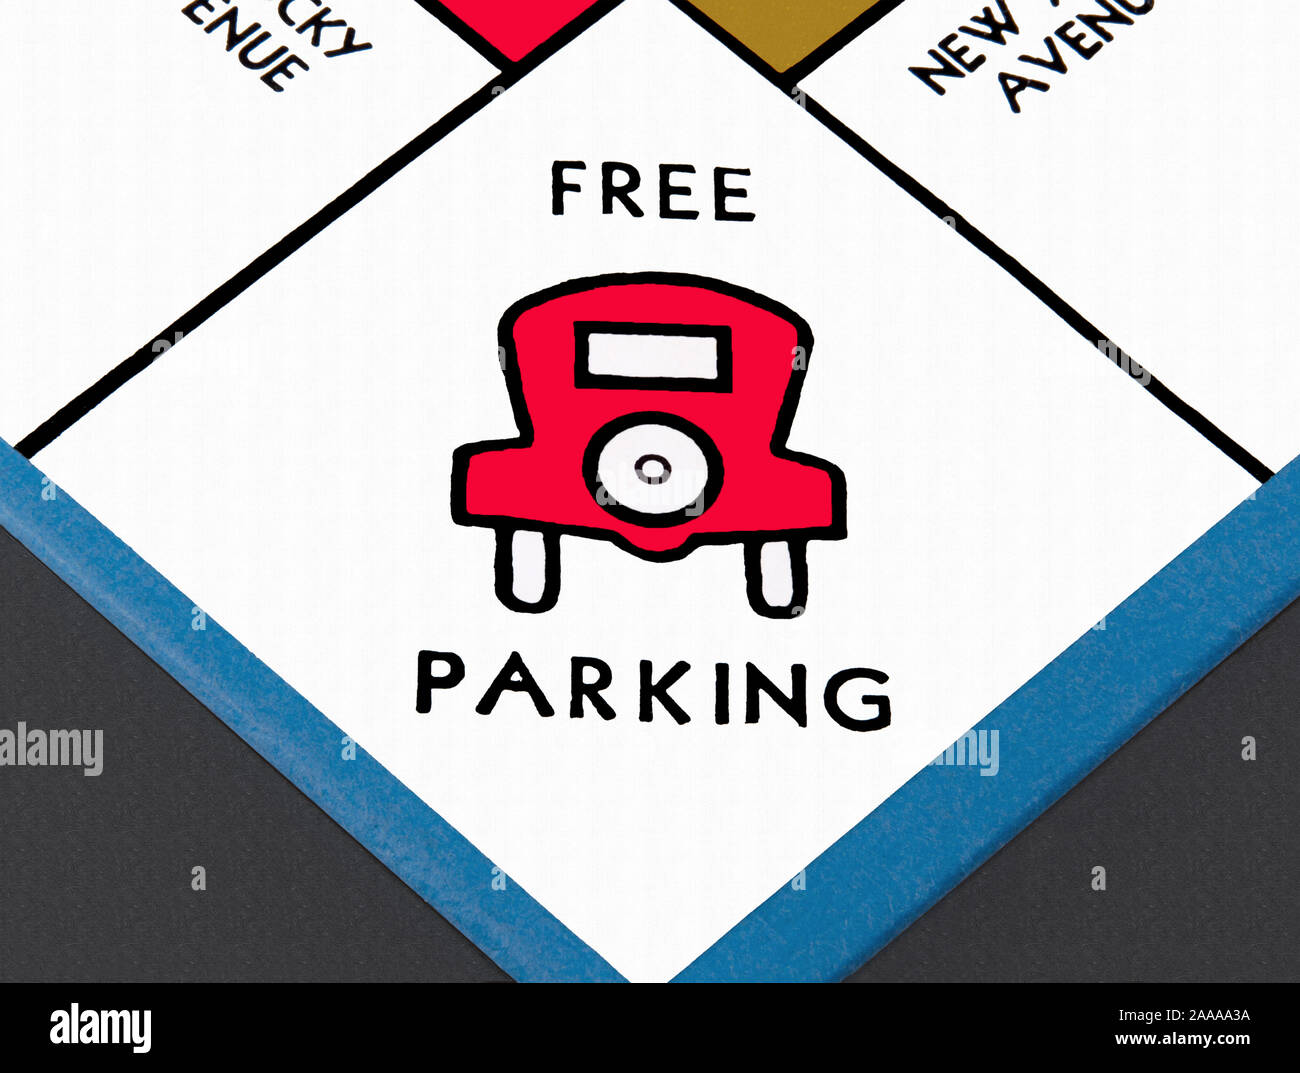 Free Parking space on a monopoly game board. Stock Photo